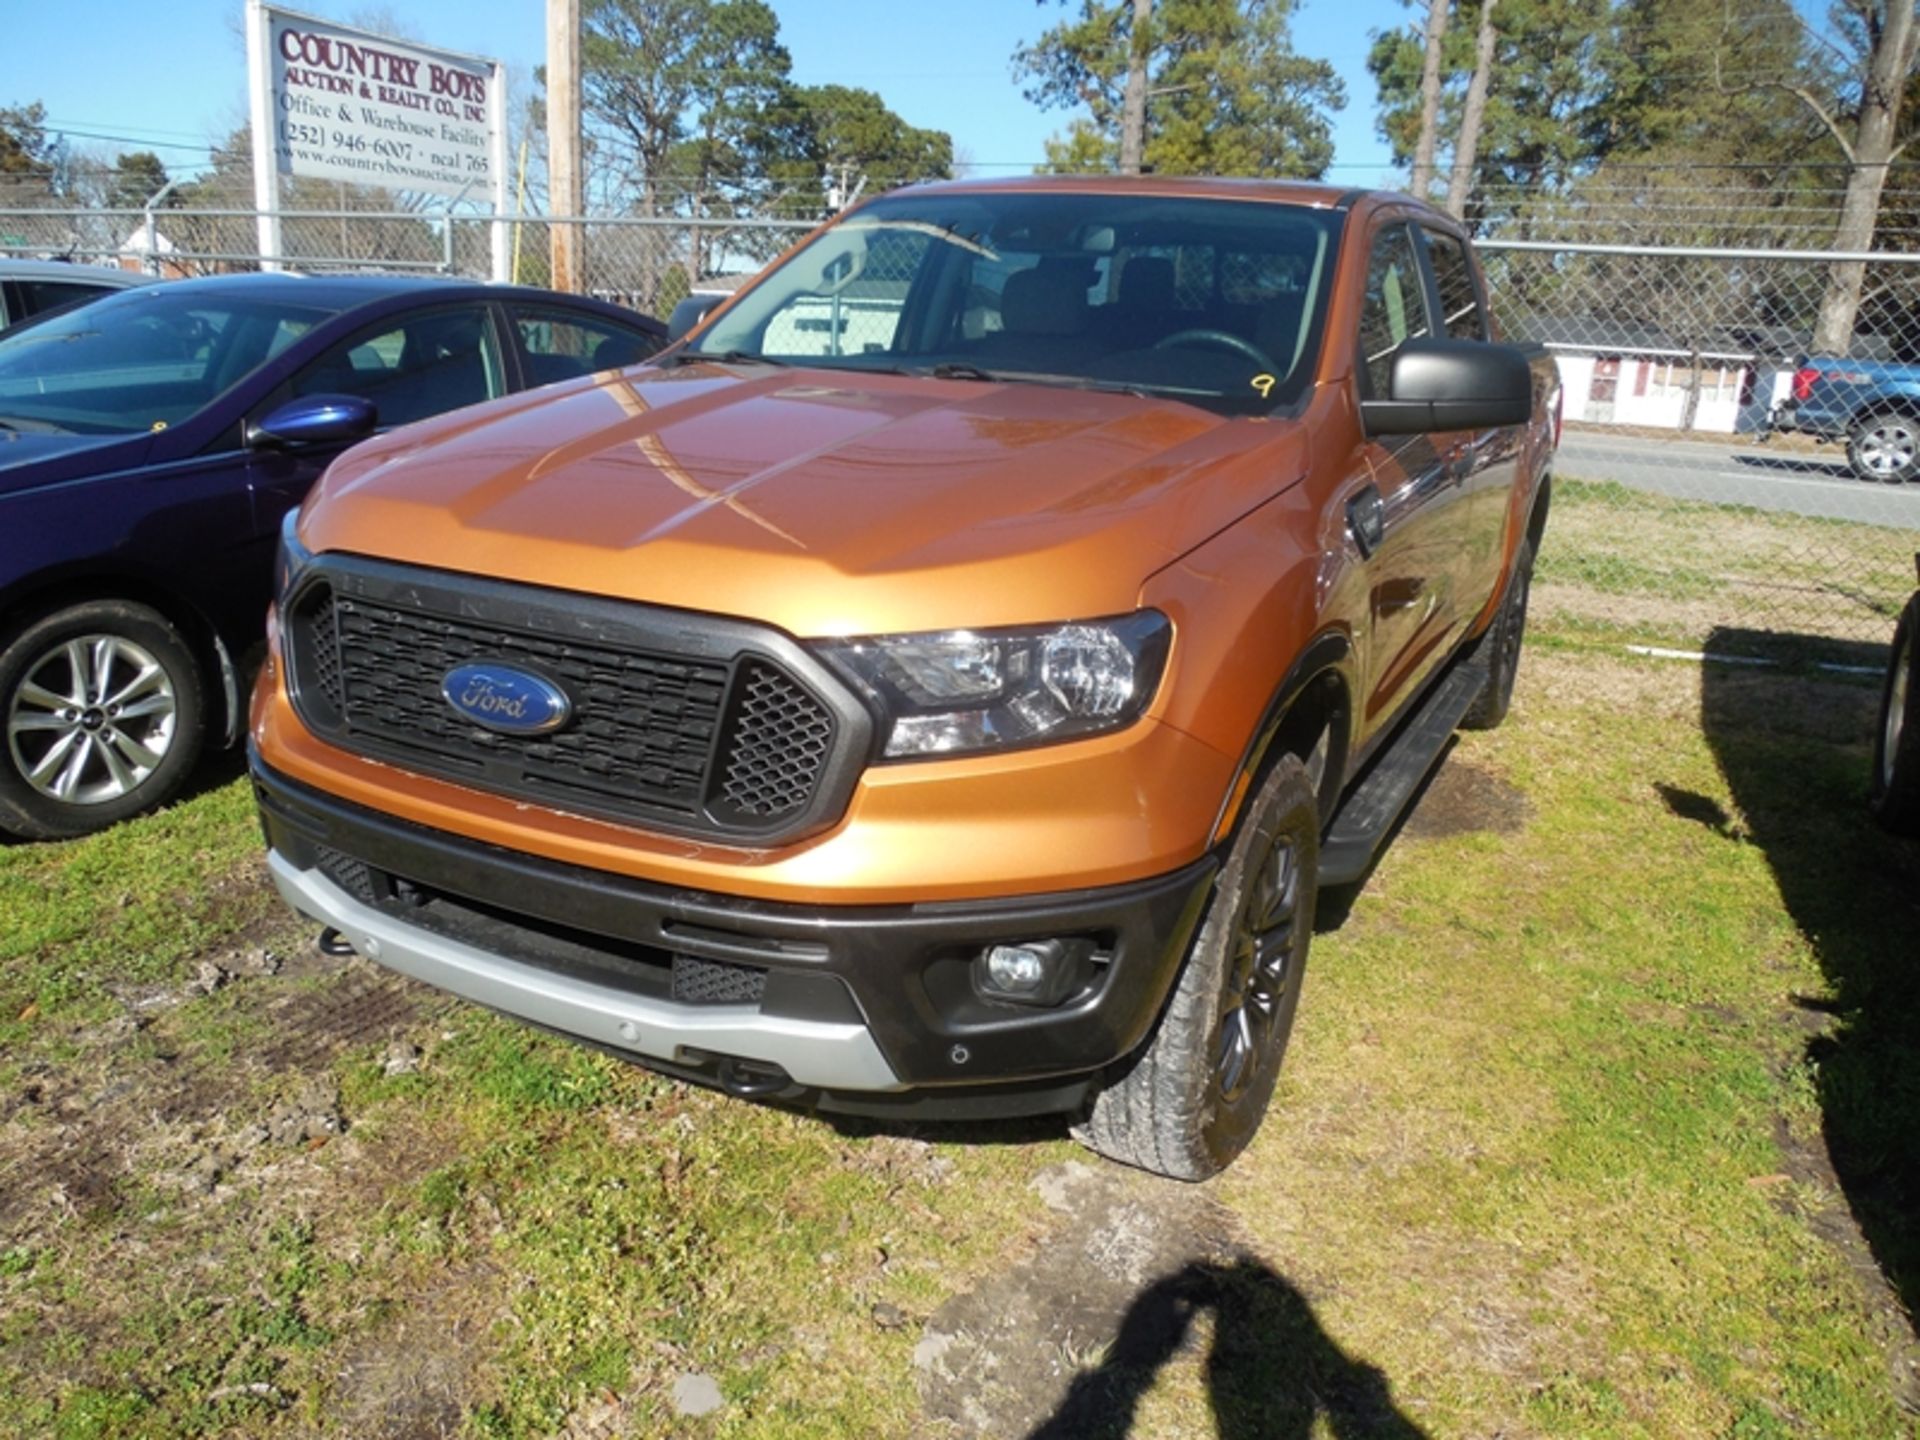 2019 FORD Ranger XLT pickup - crew cab, 4WD, bed cover, 12,230 miles